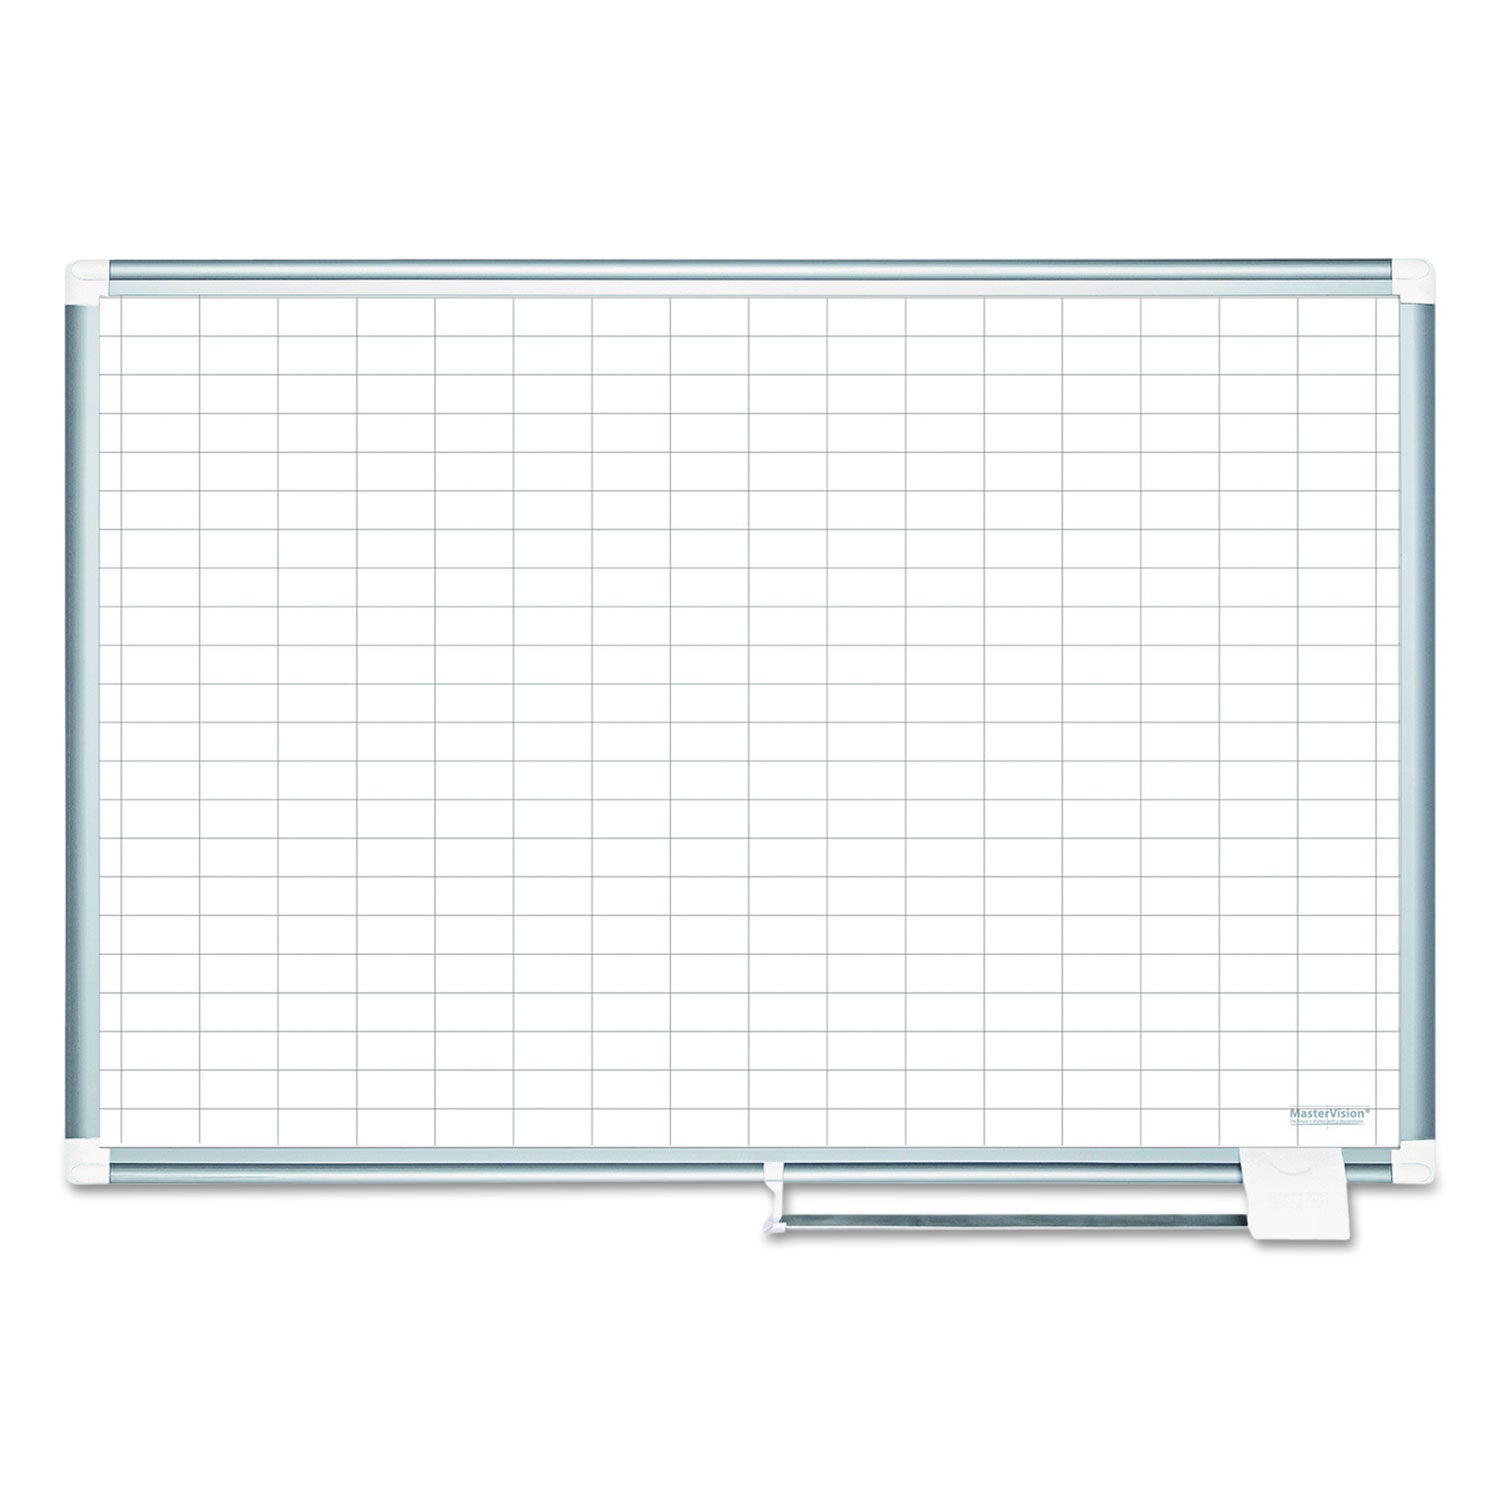 Gridded Magnetic Steel Dry Erase Planning Board with Accessories, 1 x 2 Grid, 36 x 24, White Surface, Silver Aluminum Frame - 